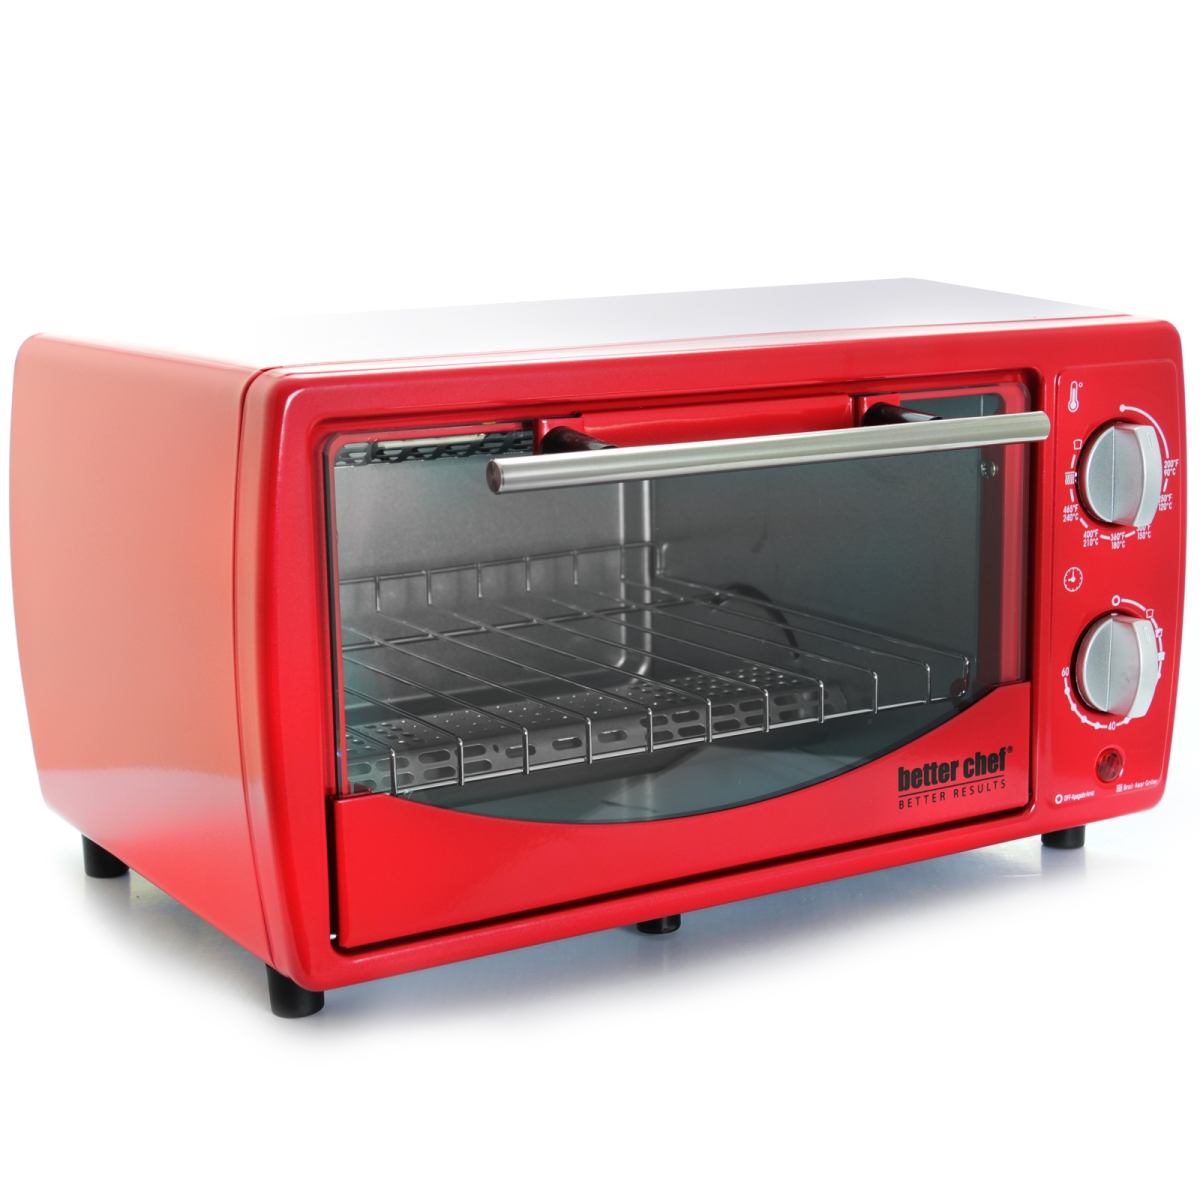 Picture of Better Chef IM-257R 9 Liter Toaster Oven Broiler